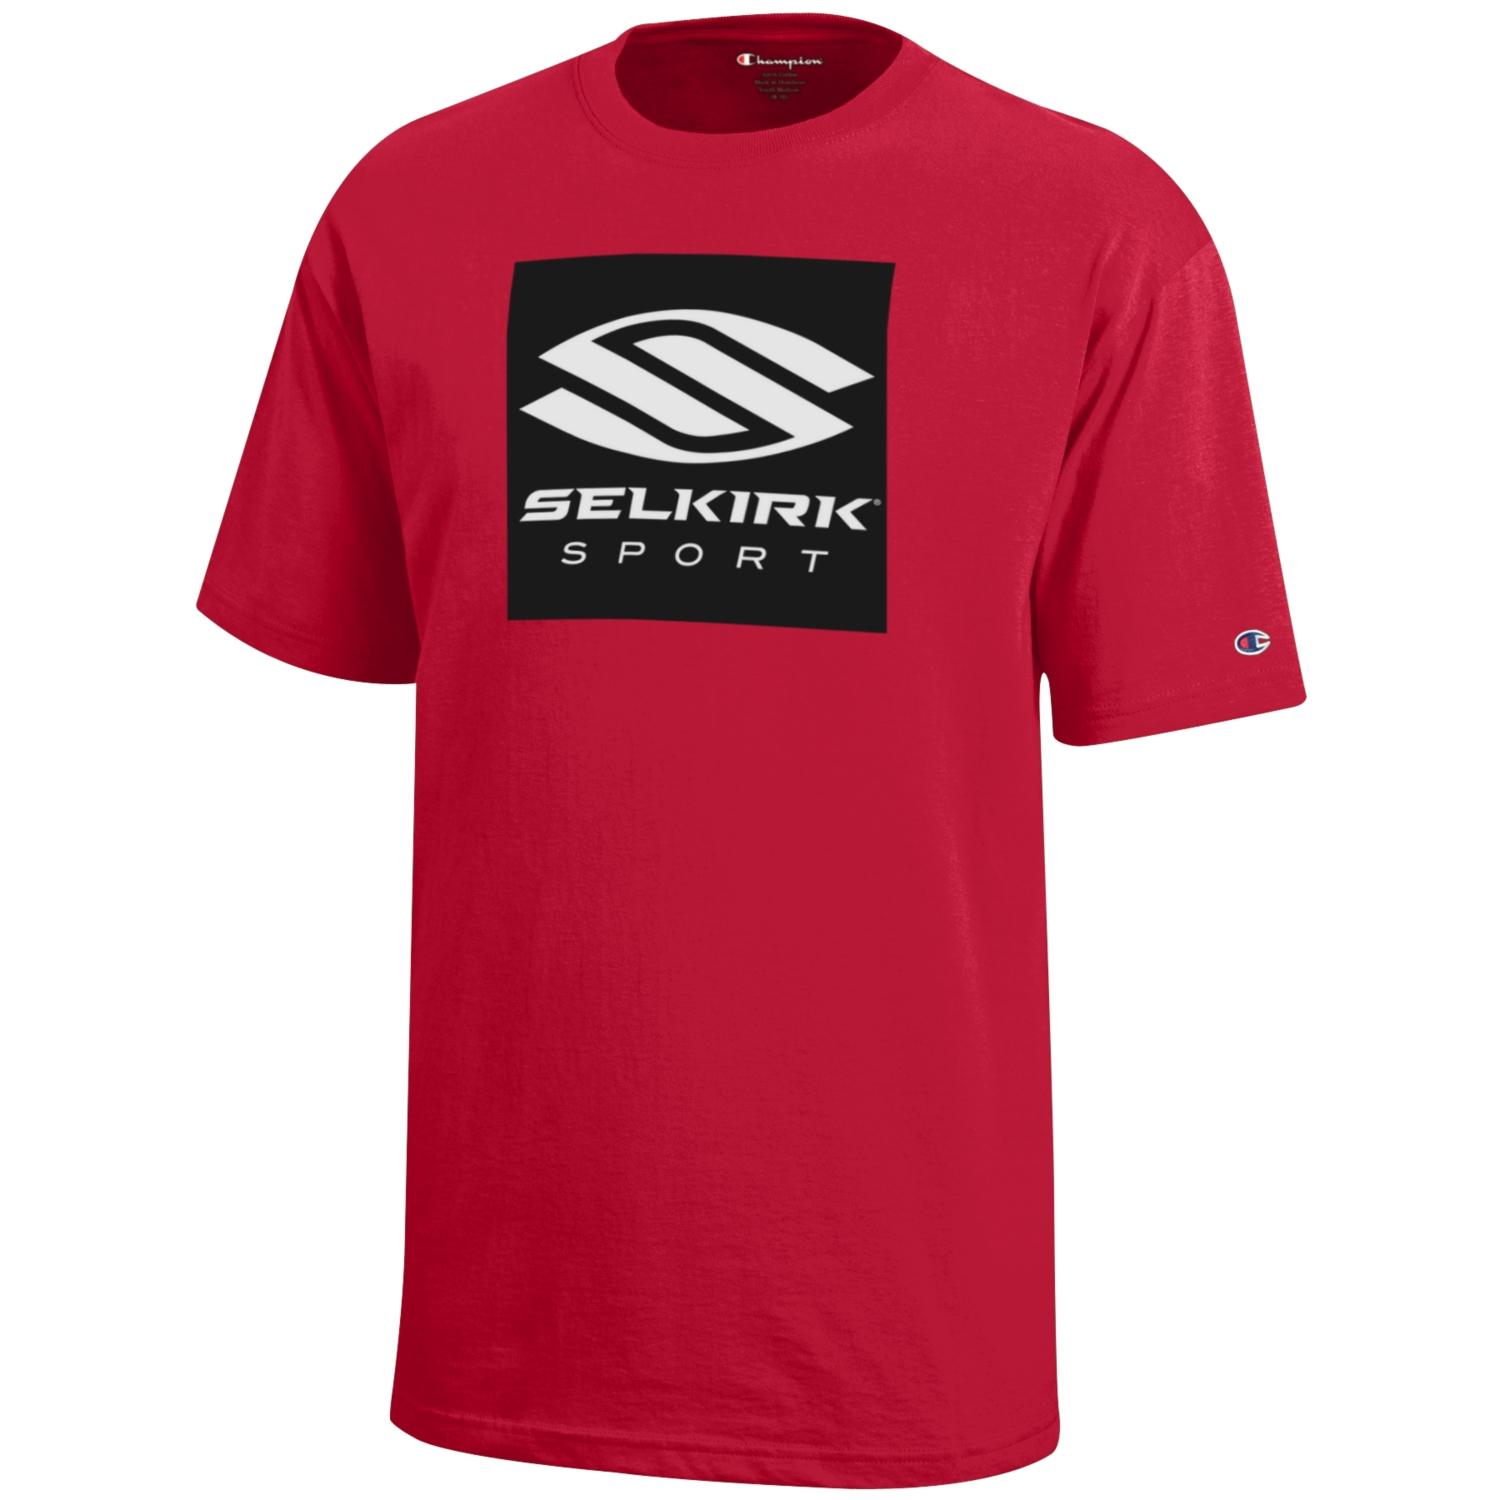 Scarlet Selkirk Youth Short Sleeve Jersey - Champion